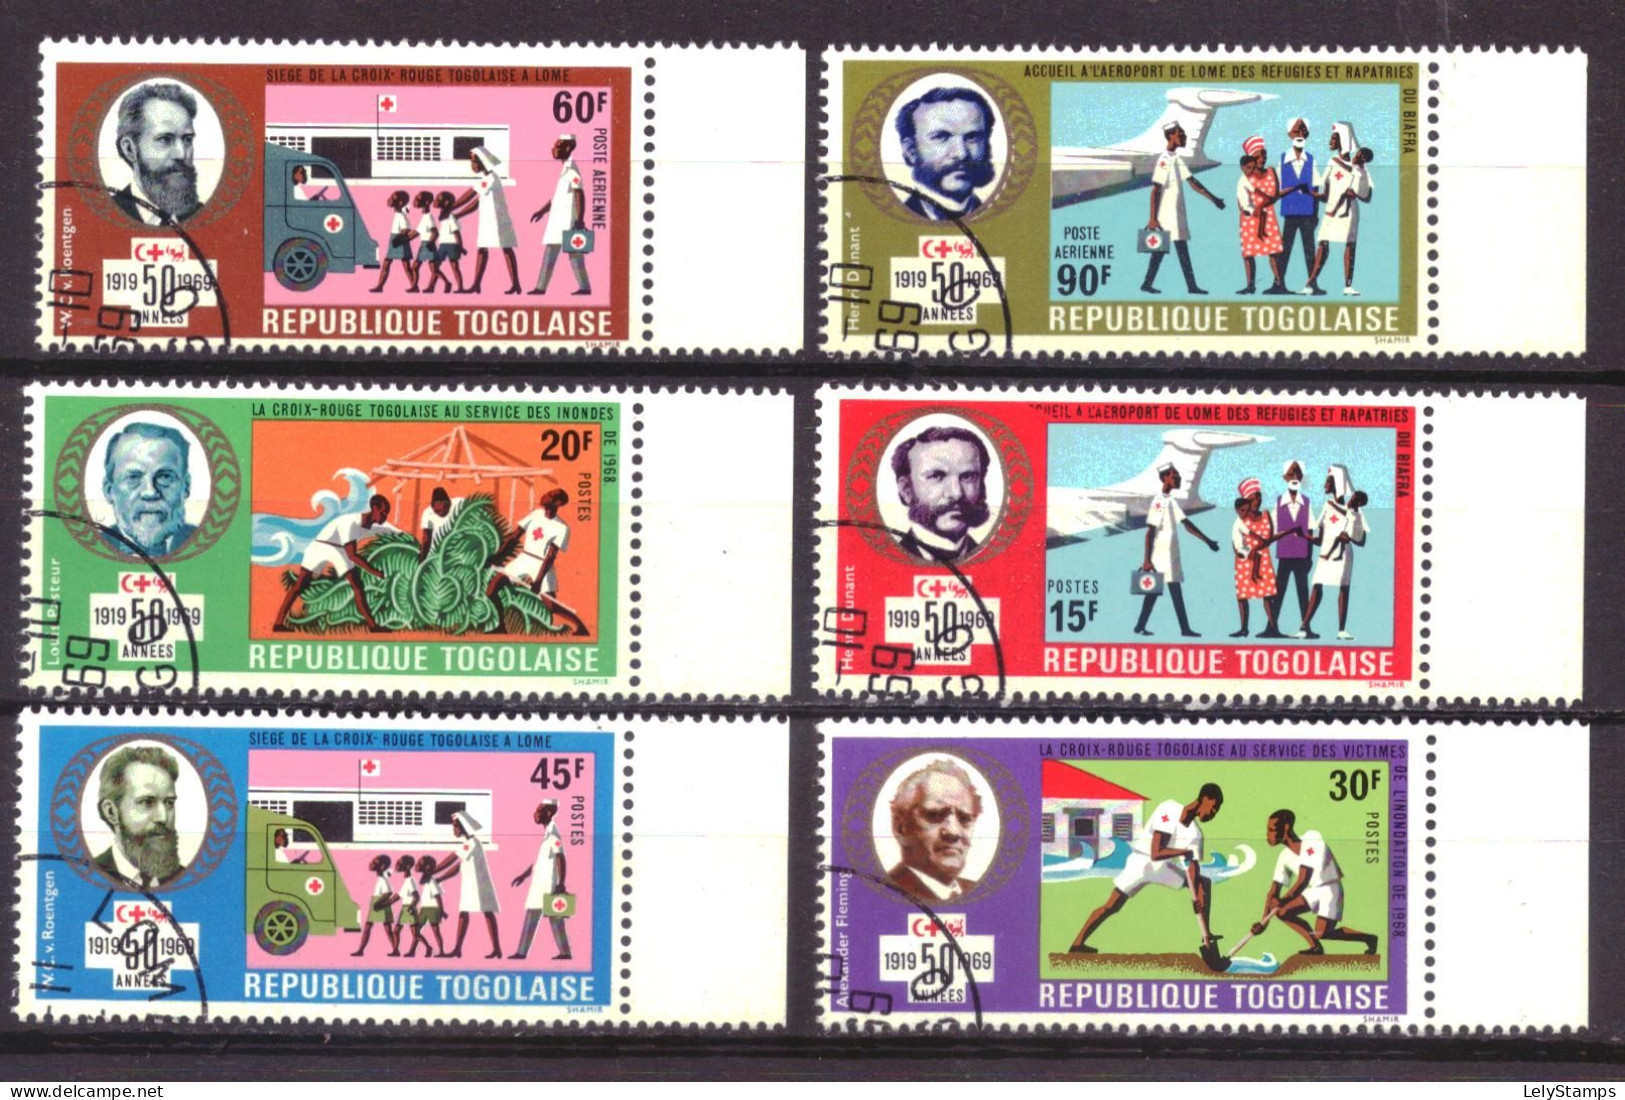 Togo 728 T/m 733 Used Red Cross (1969) - Togo (1960-...)